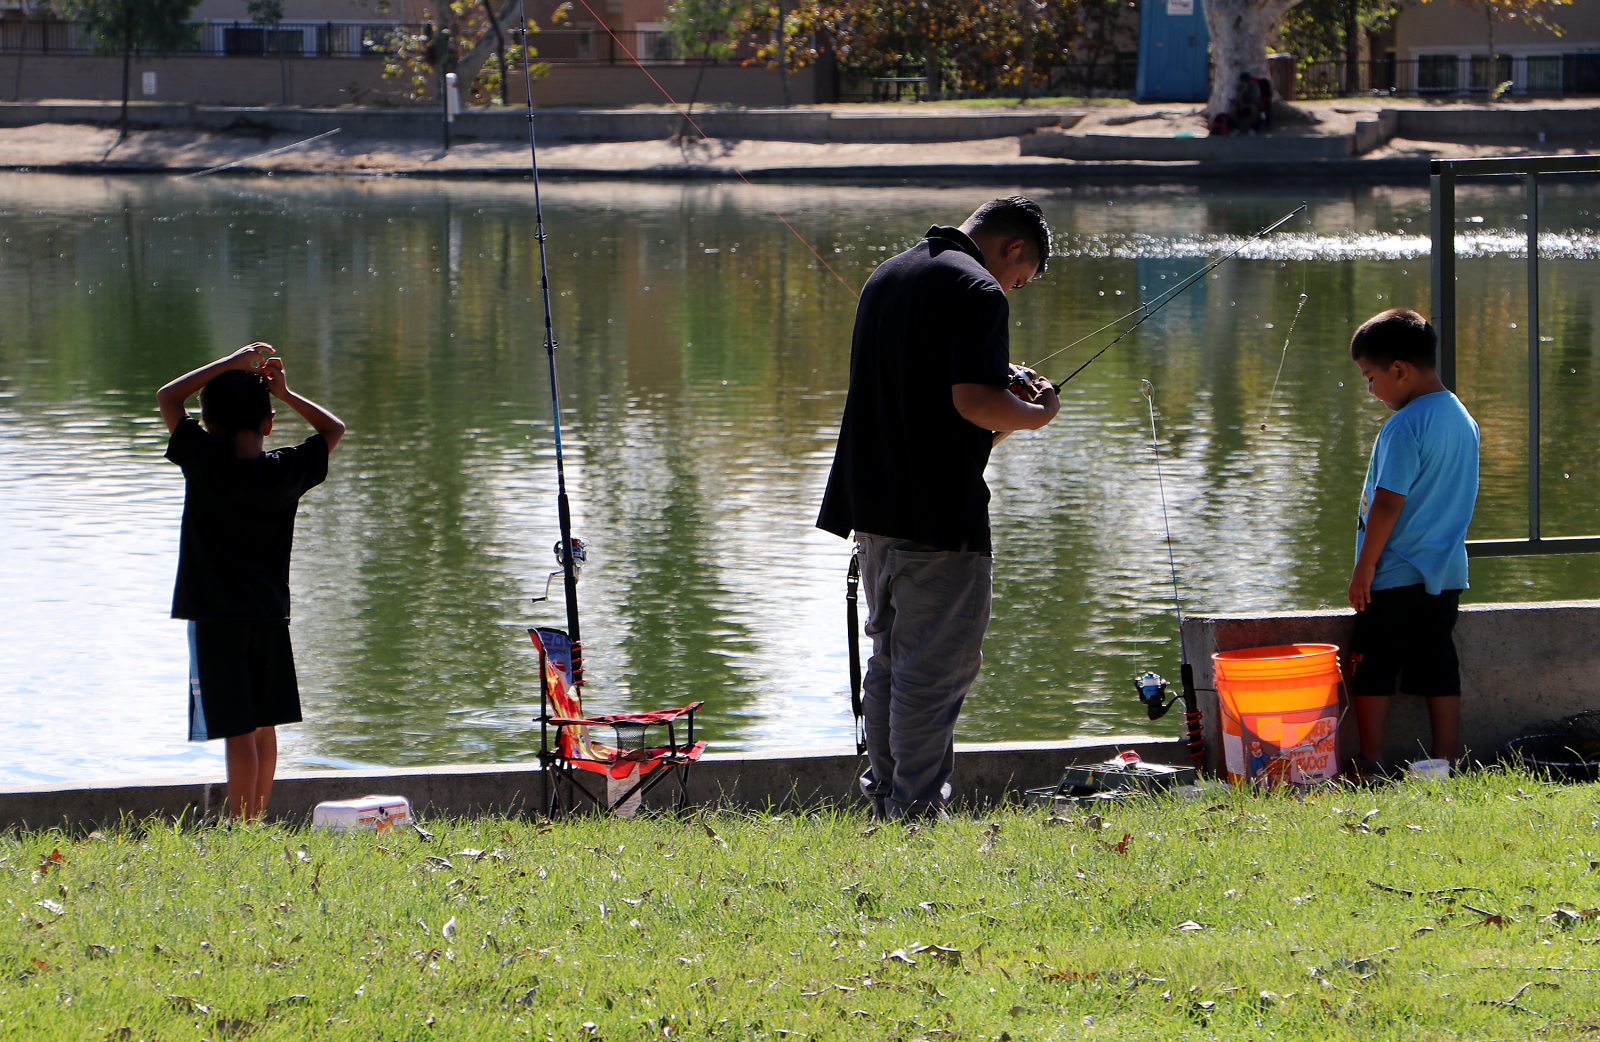 Father fishing with two boys at Guasti park.